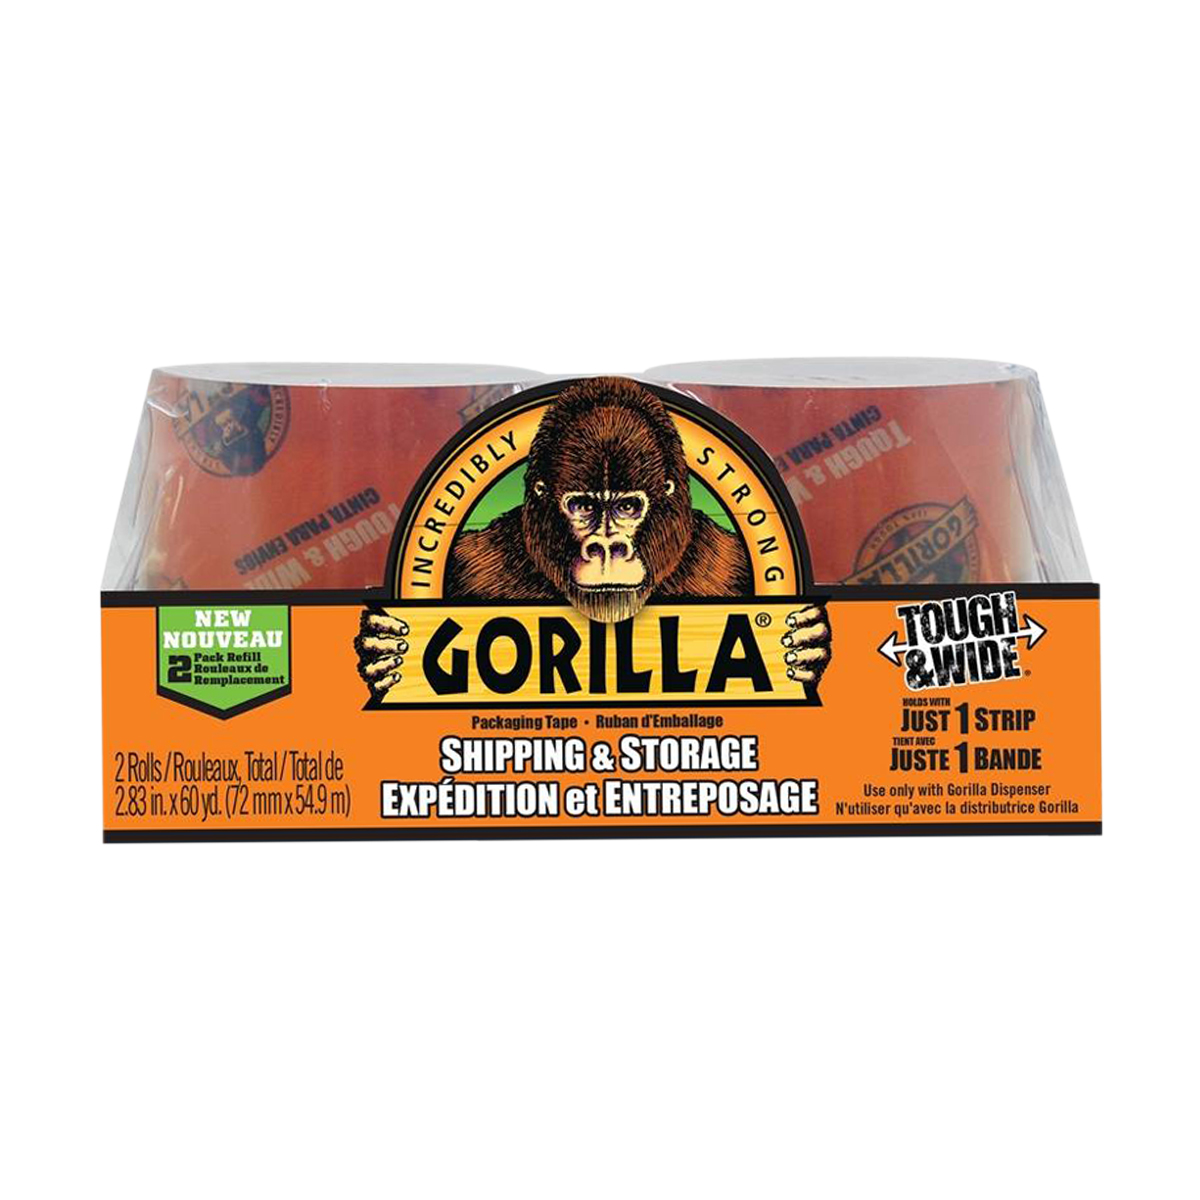 Gorilla Tough and Wide Packaging Tape - 30 yd